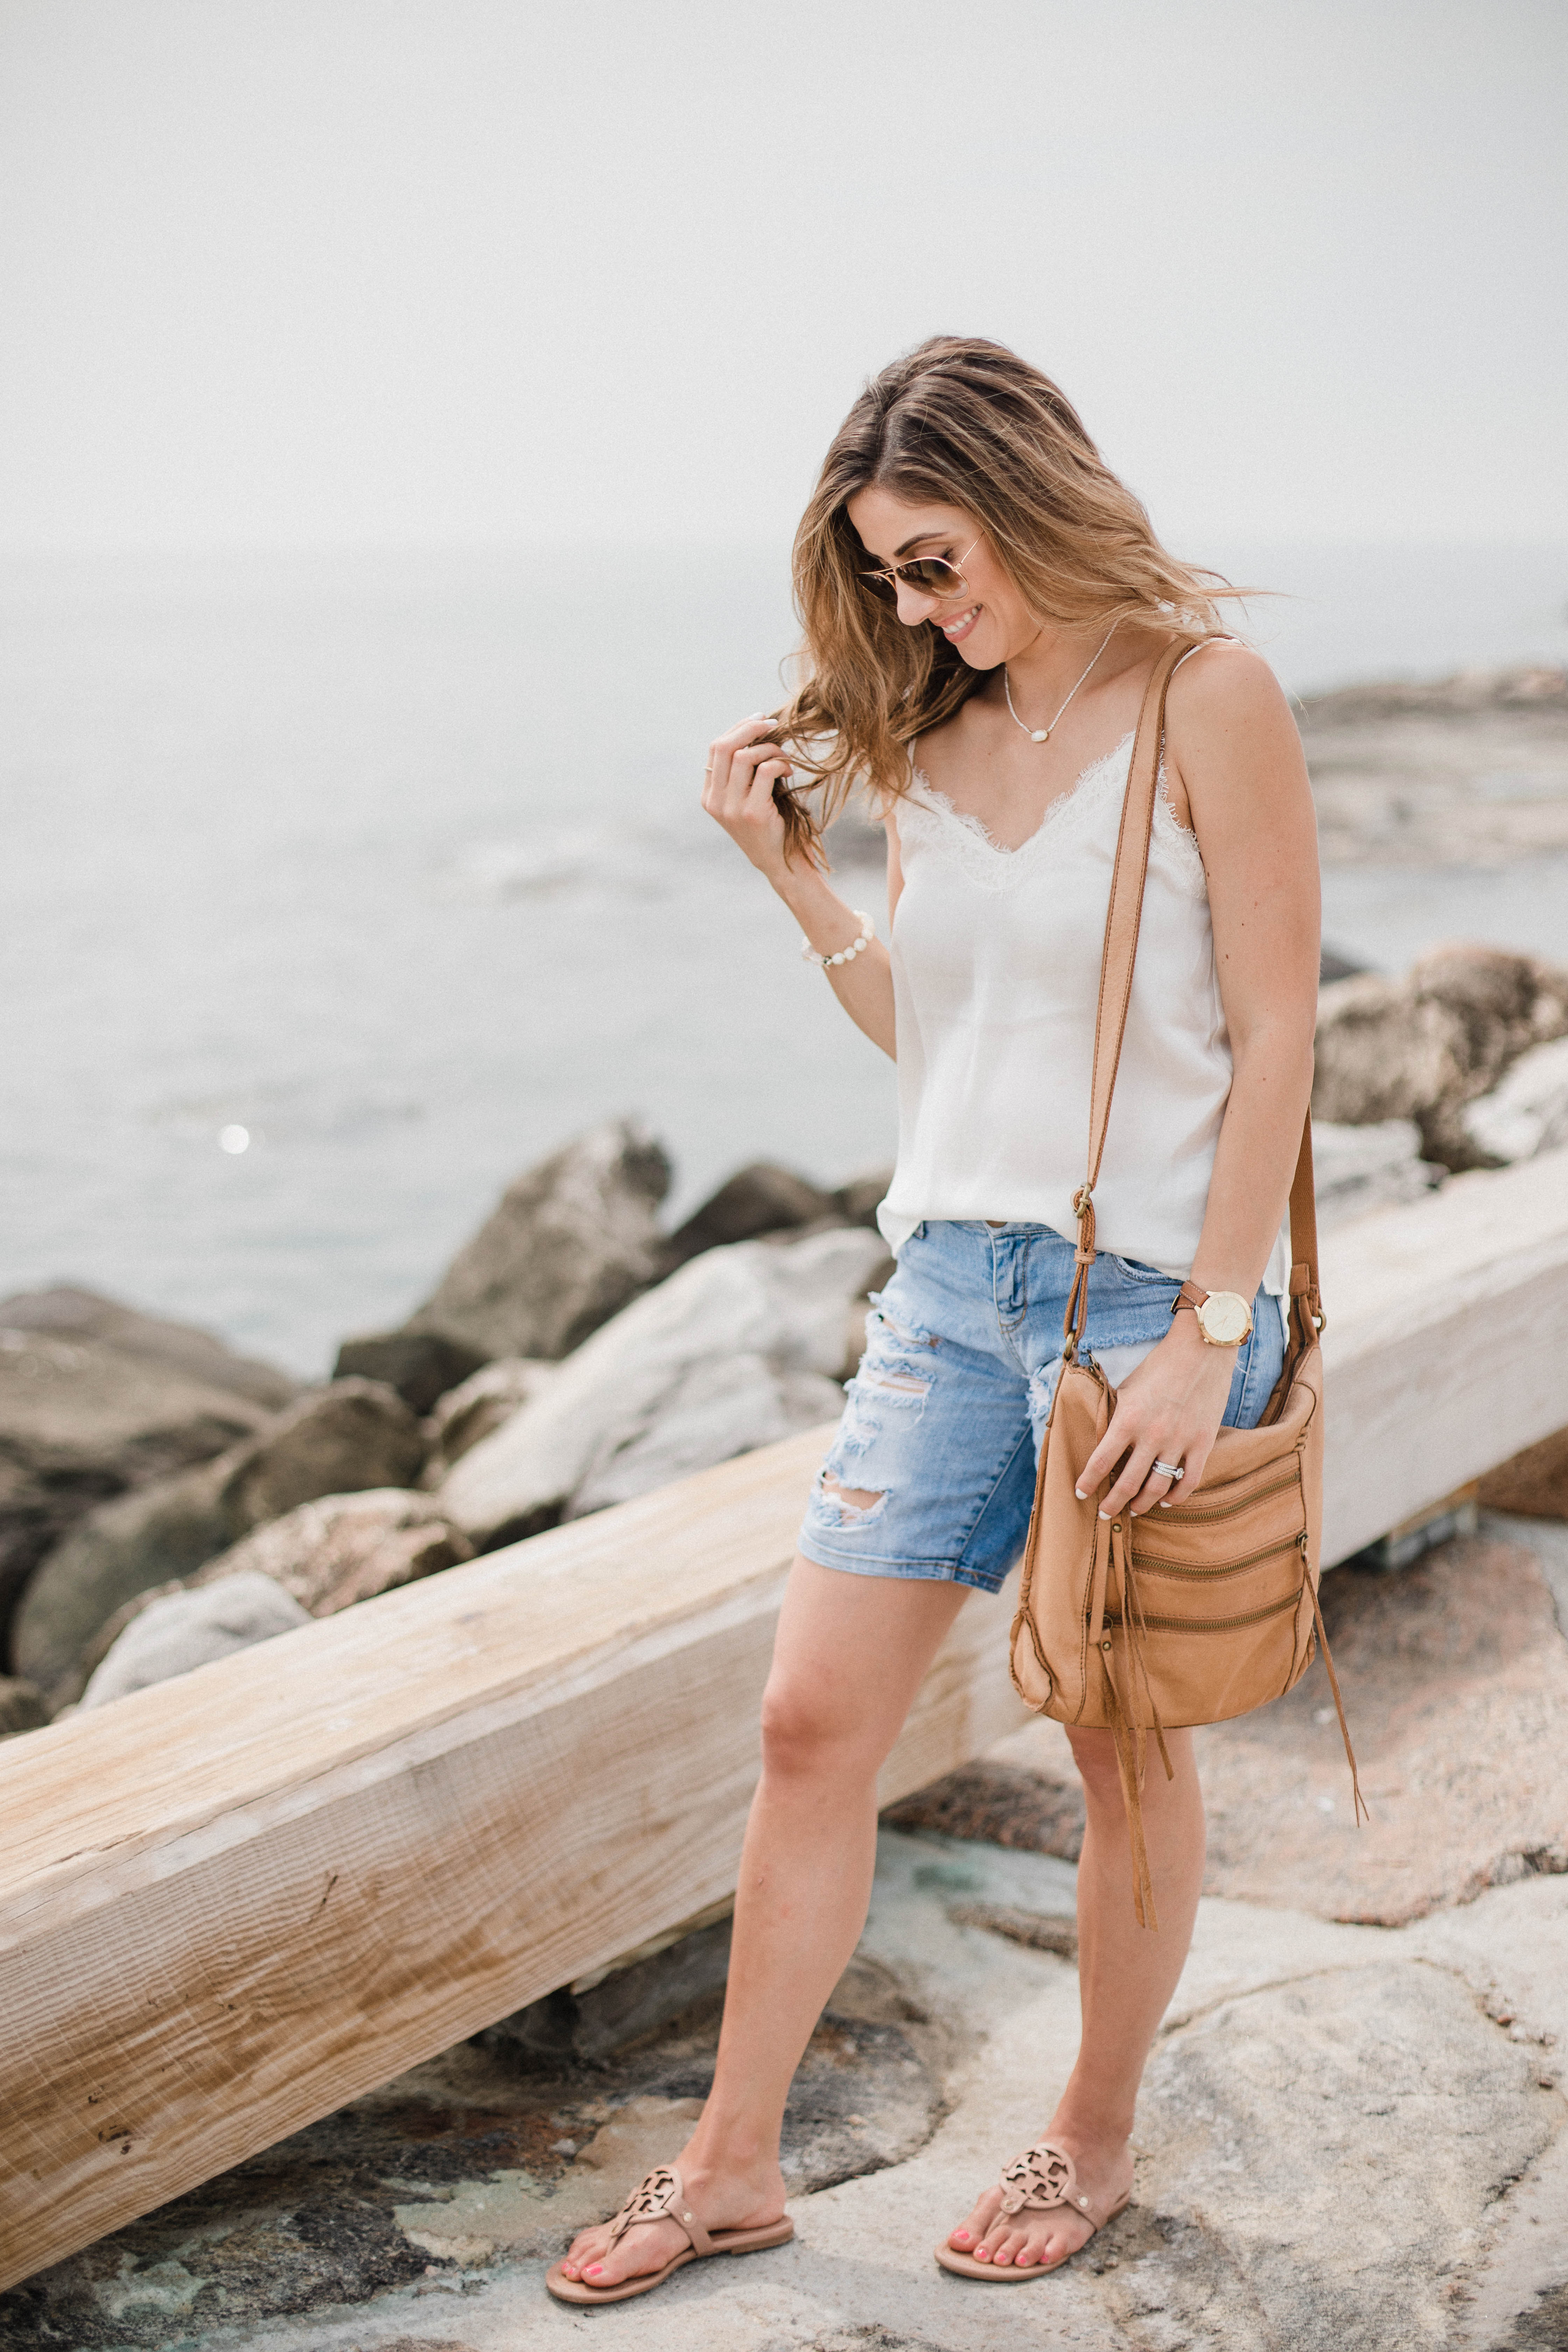 Connecticut life and style blogger Lauren McBride shares why women should have a cherished piece of jewelry or jewelry collection to pass down to loved ones in years to come.